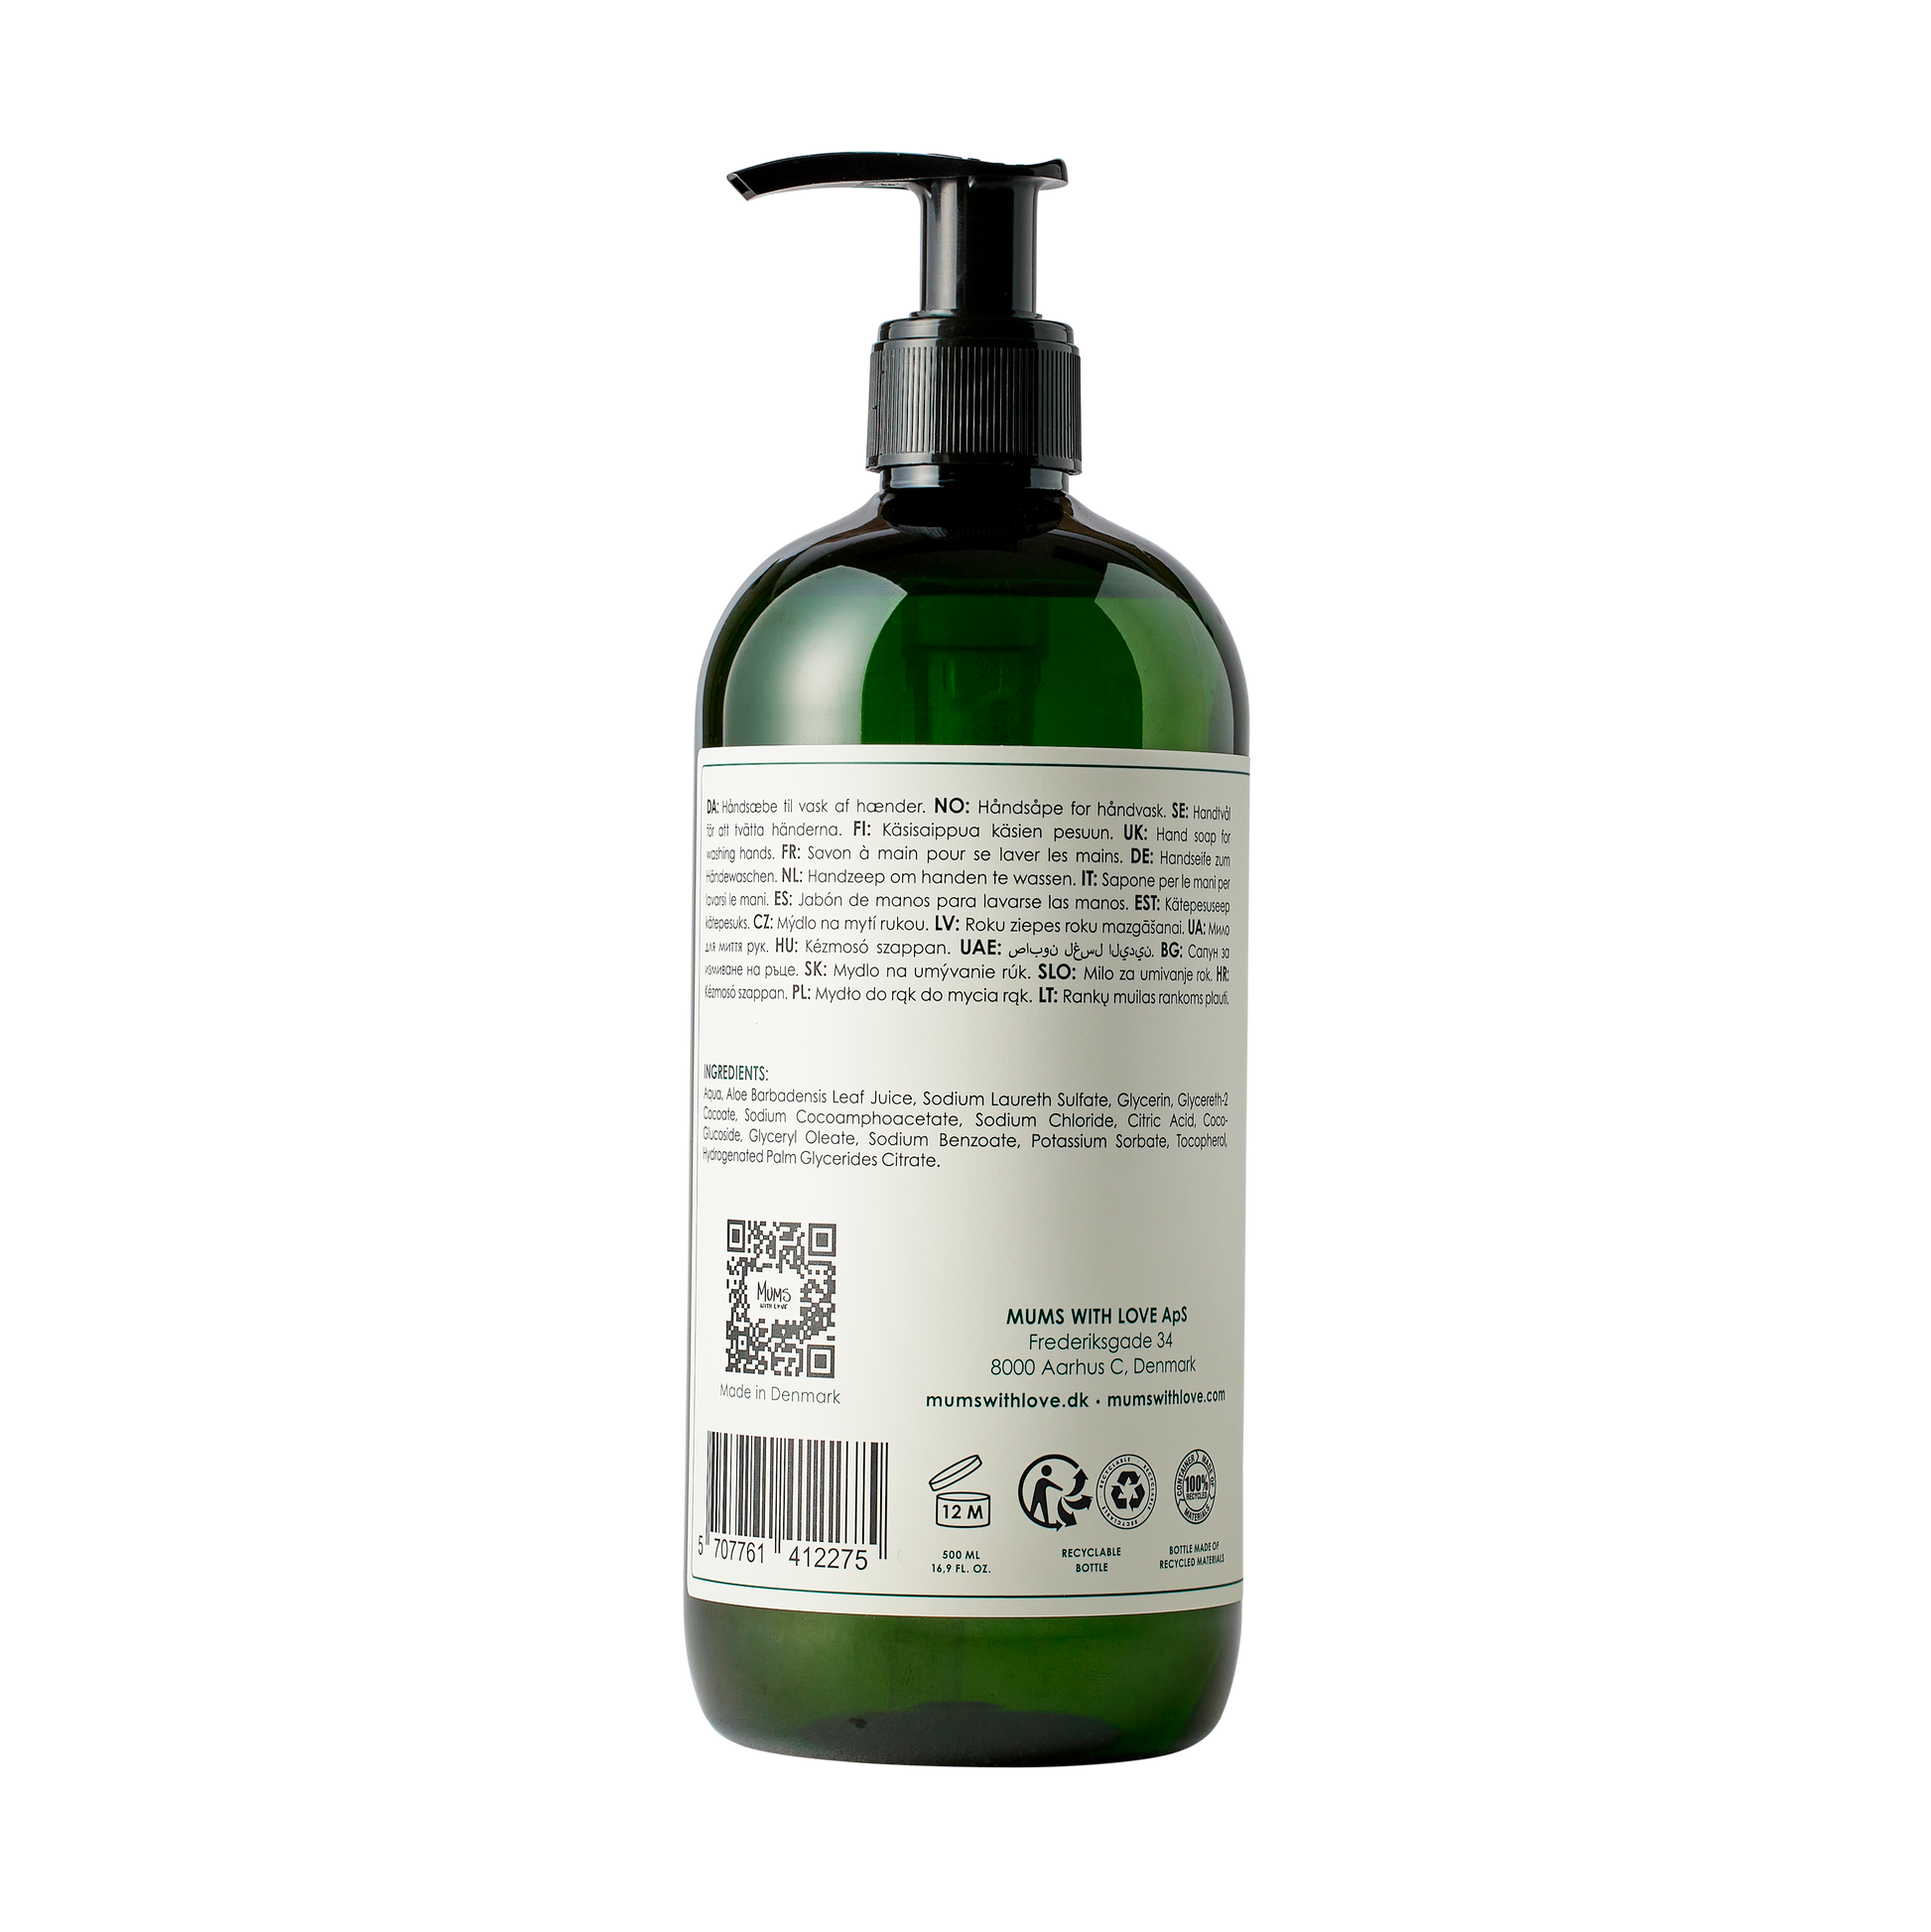 MUMS WITH LOVE APS HAND SOAP 500 ml Body